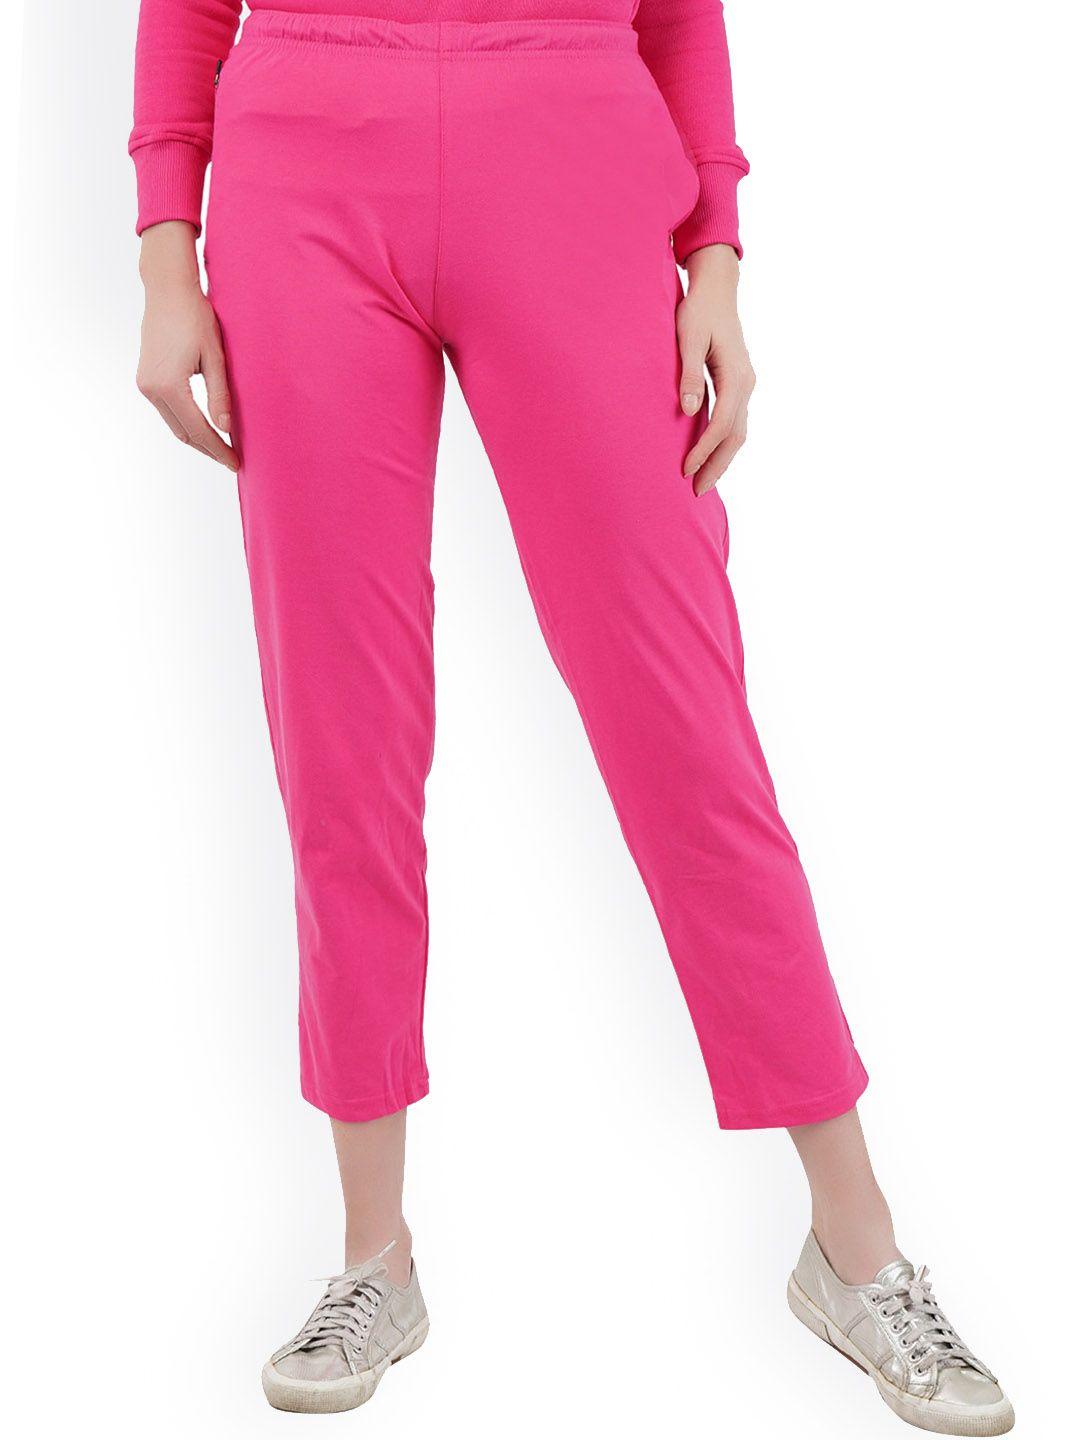 dyca women fuchsia pink solid regular fit cotton track pant